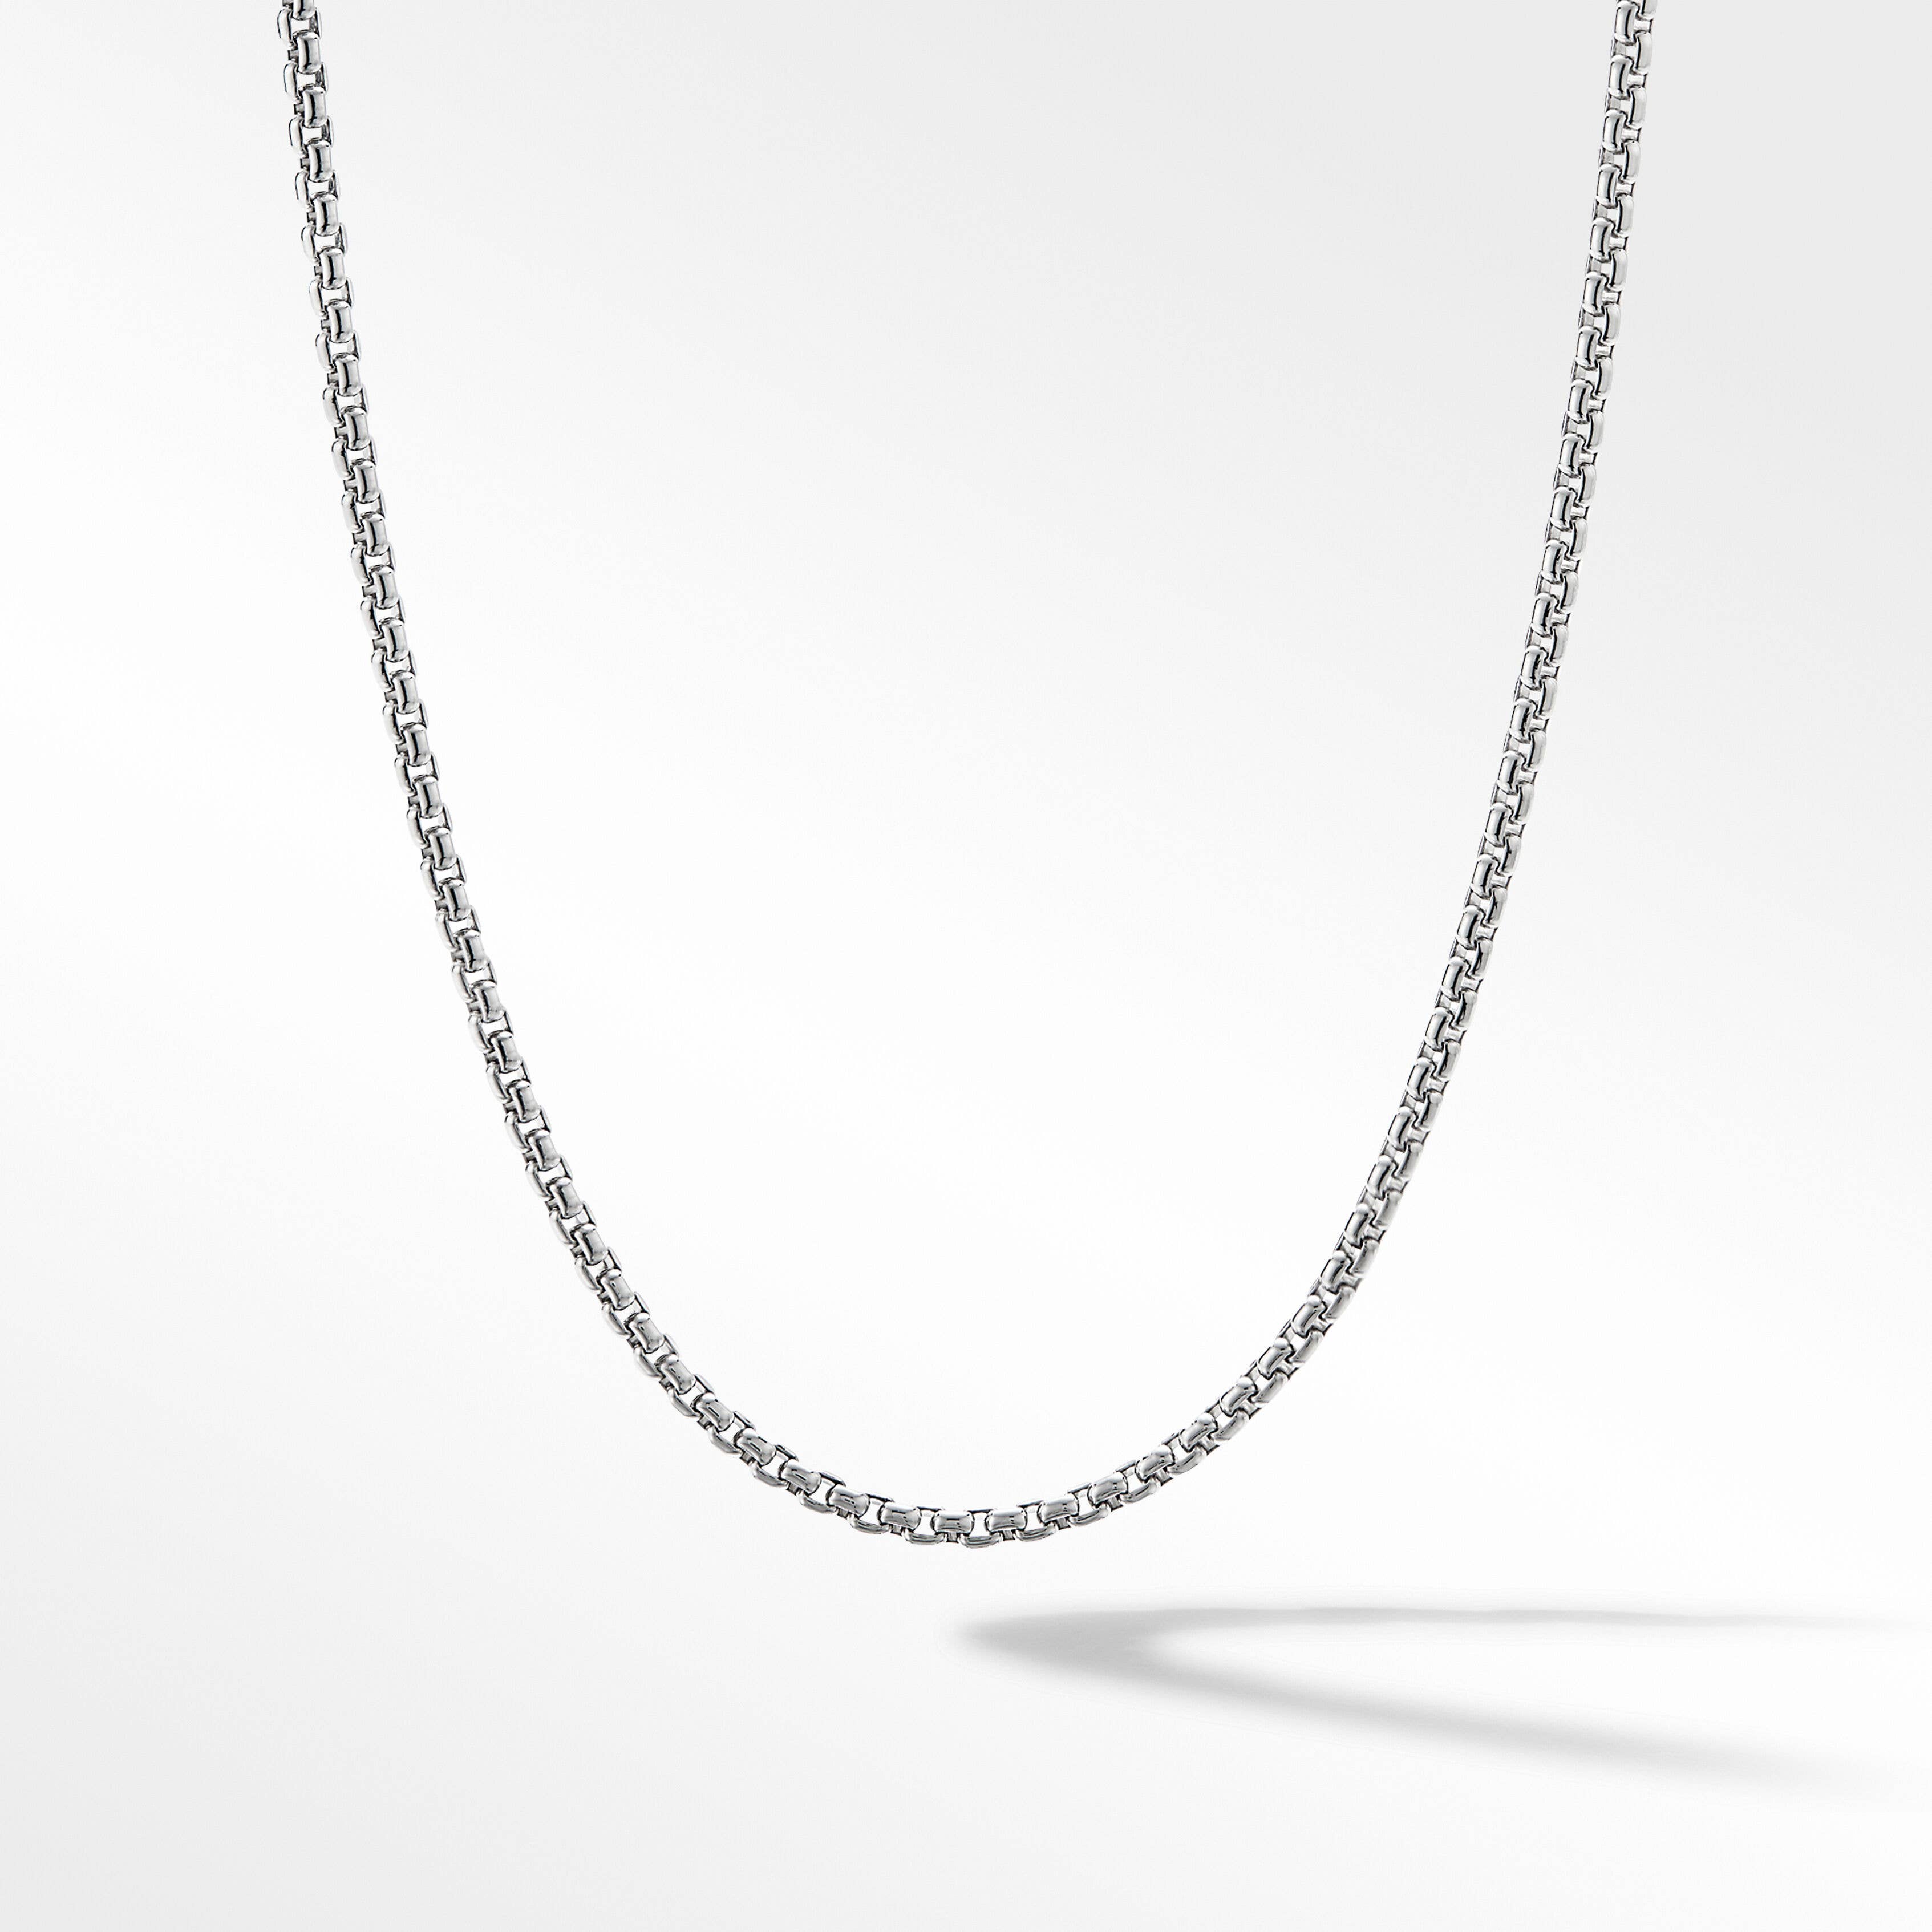 Box Chain Necklace in Platinum, 2.7mm